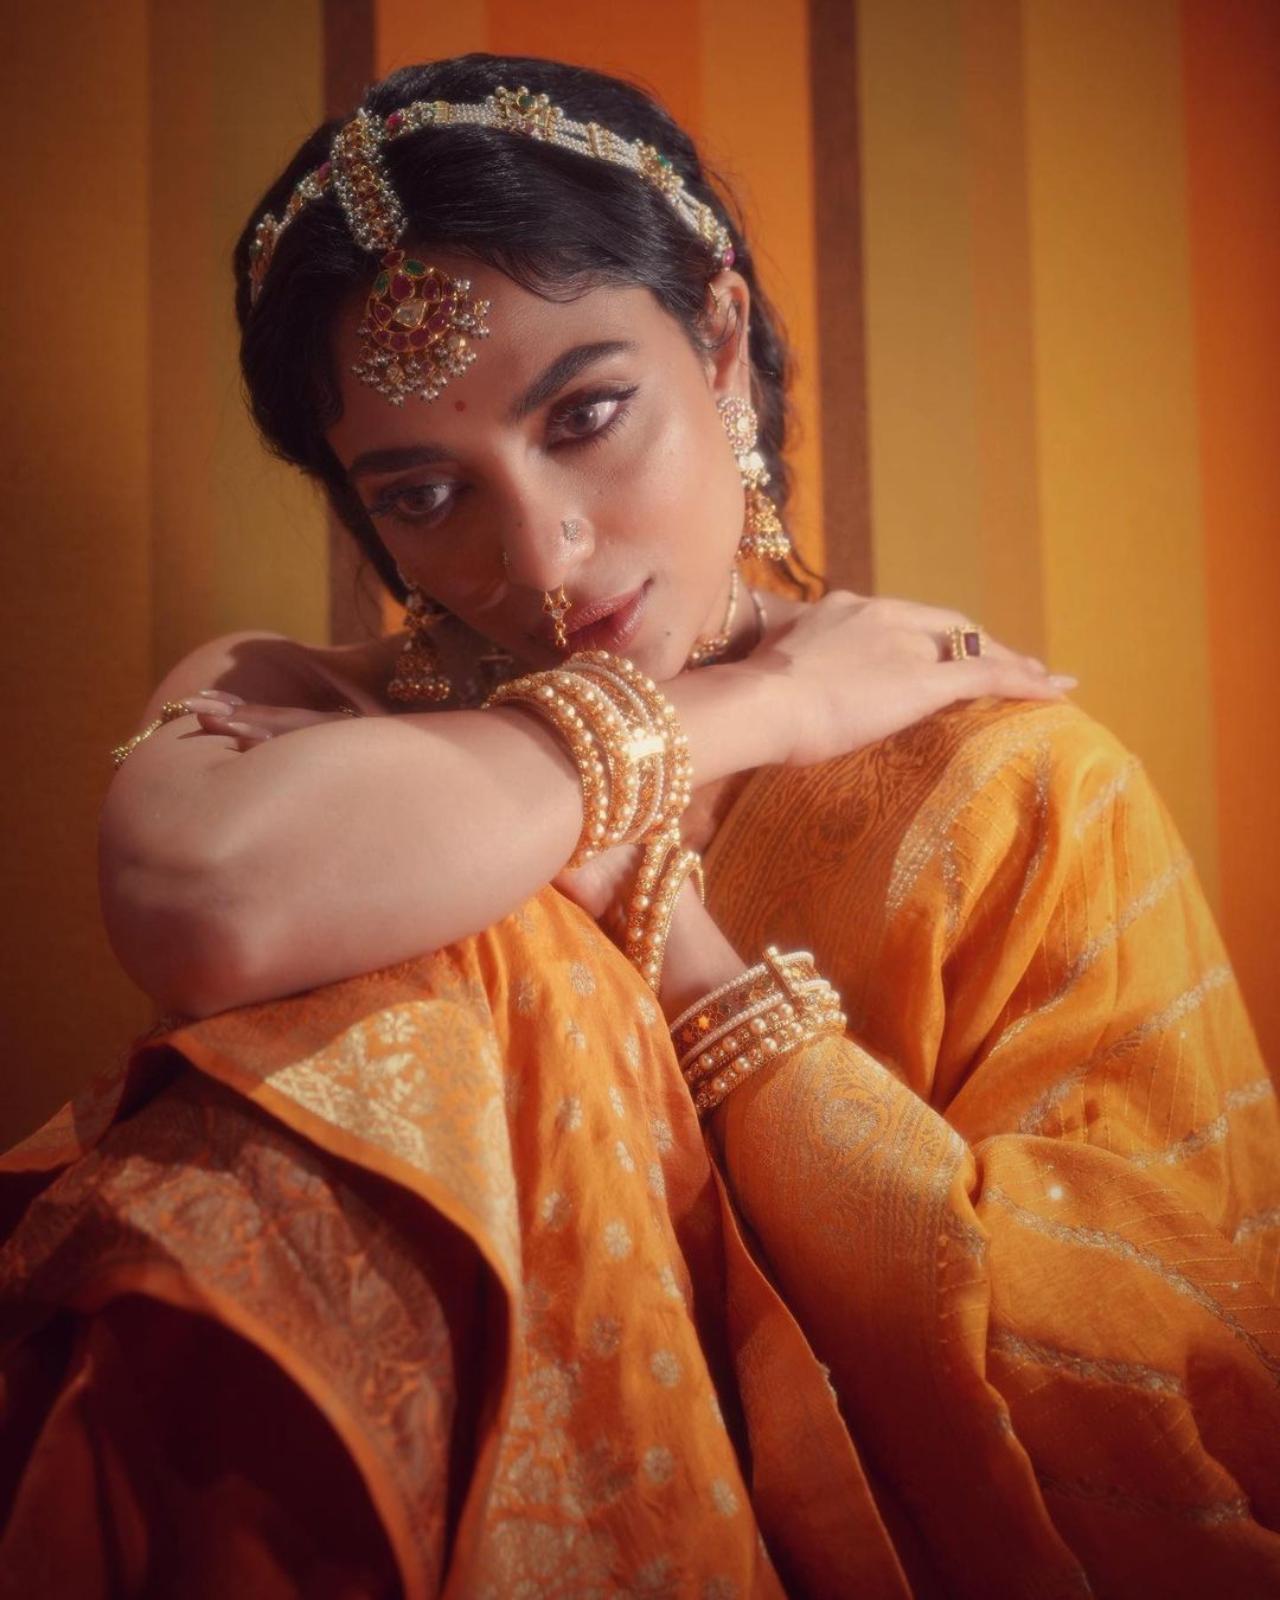 For the grand event in Chennai, Sobhita opted for a yellow silk saree. She wore it with an orange strapless brocade silk blouse with gold patterns with atie detail on the back. She completed the look with a mustard yellow dupatta. The saree was embellished with sequins